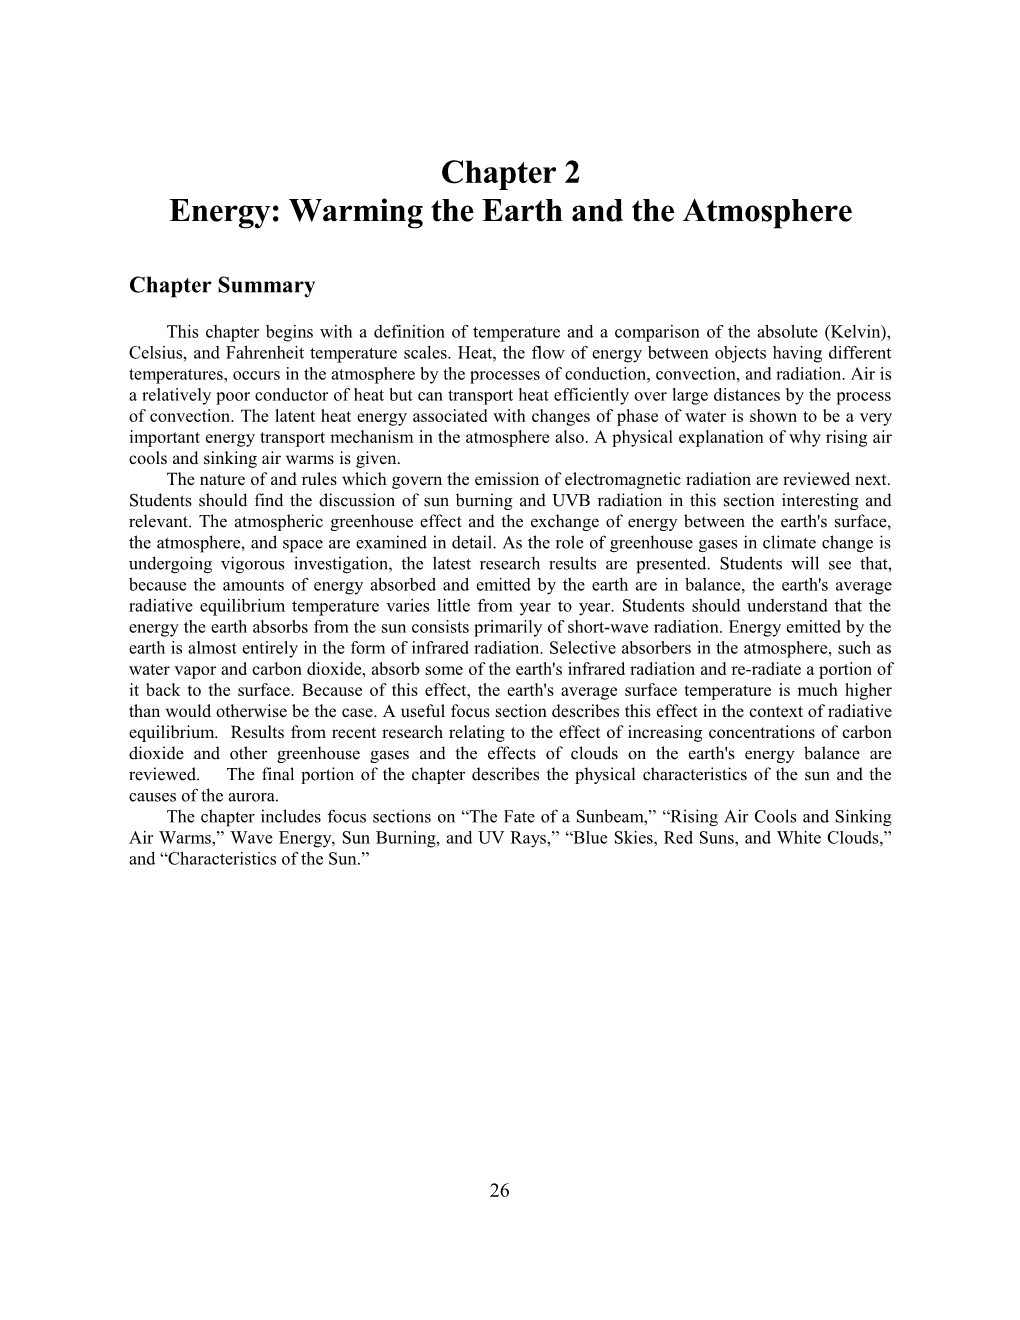 Energy: Warming the Earth and the Atmosphere